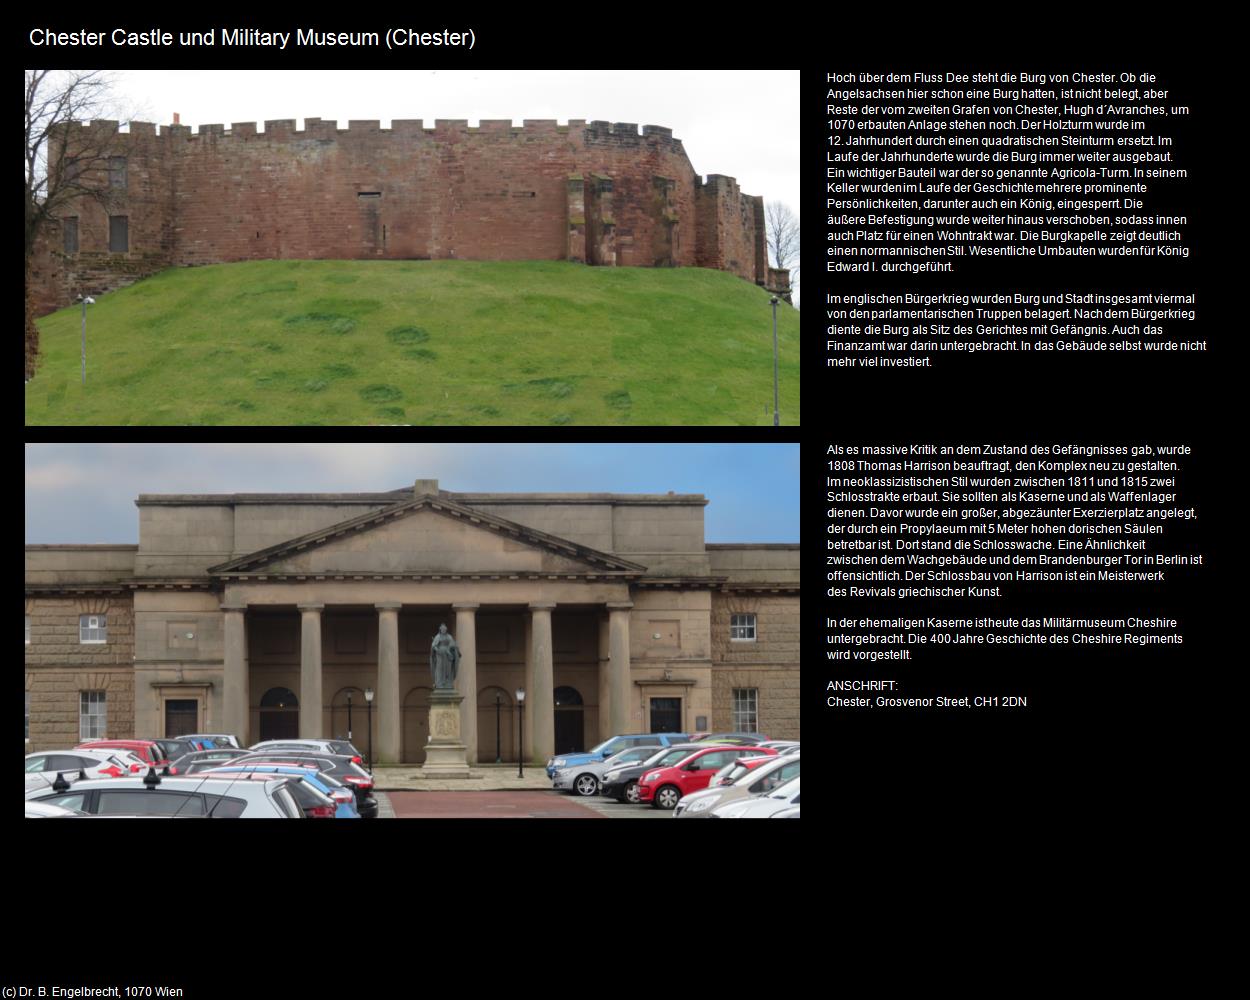 Chester Castle und Military Museum  (Chester, England) in Kulturatlas-ENGLAND und WALES